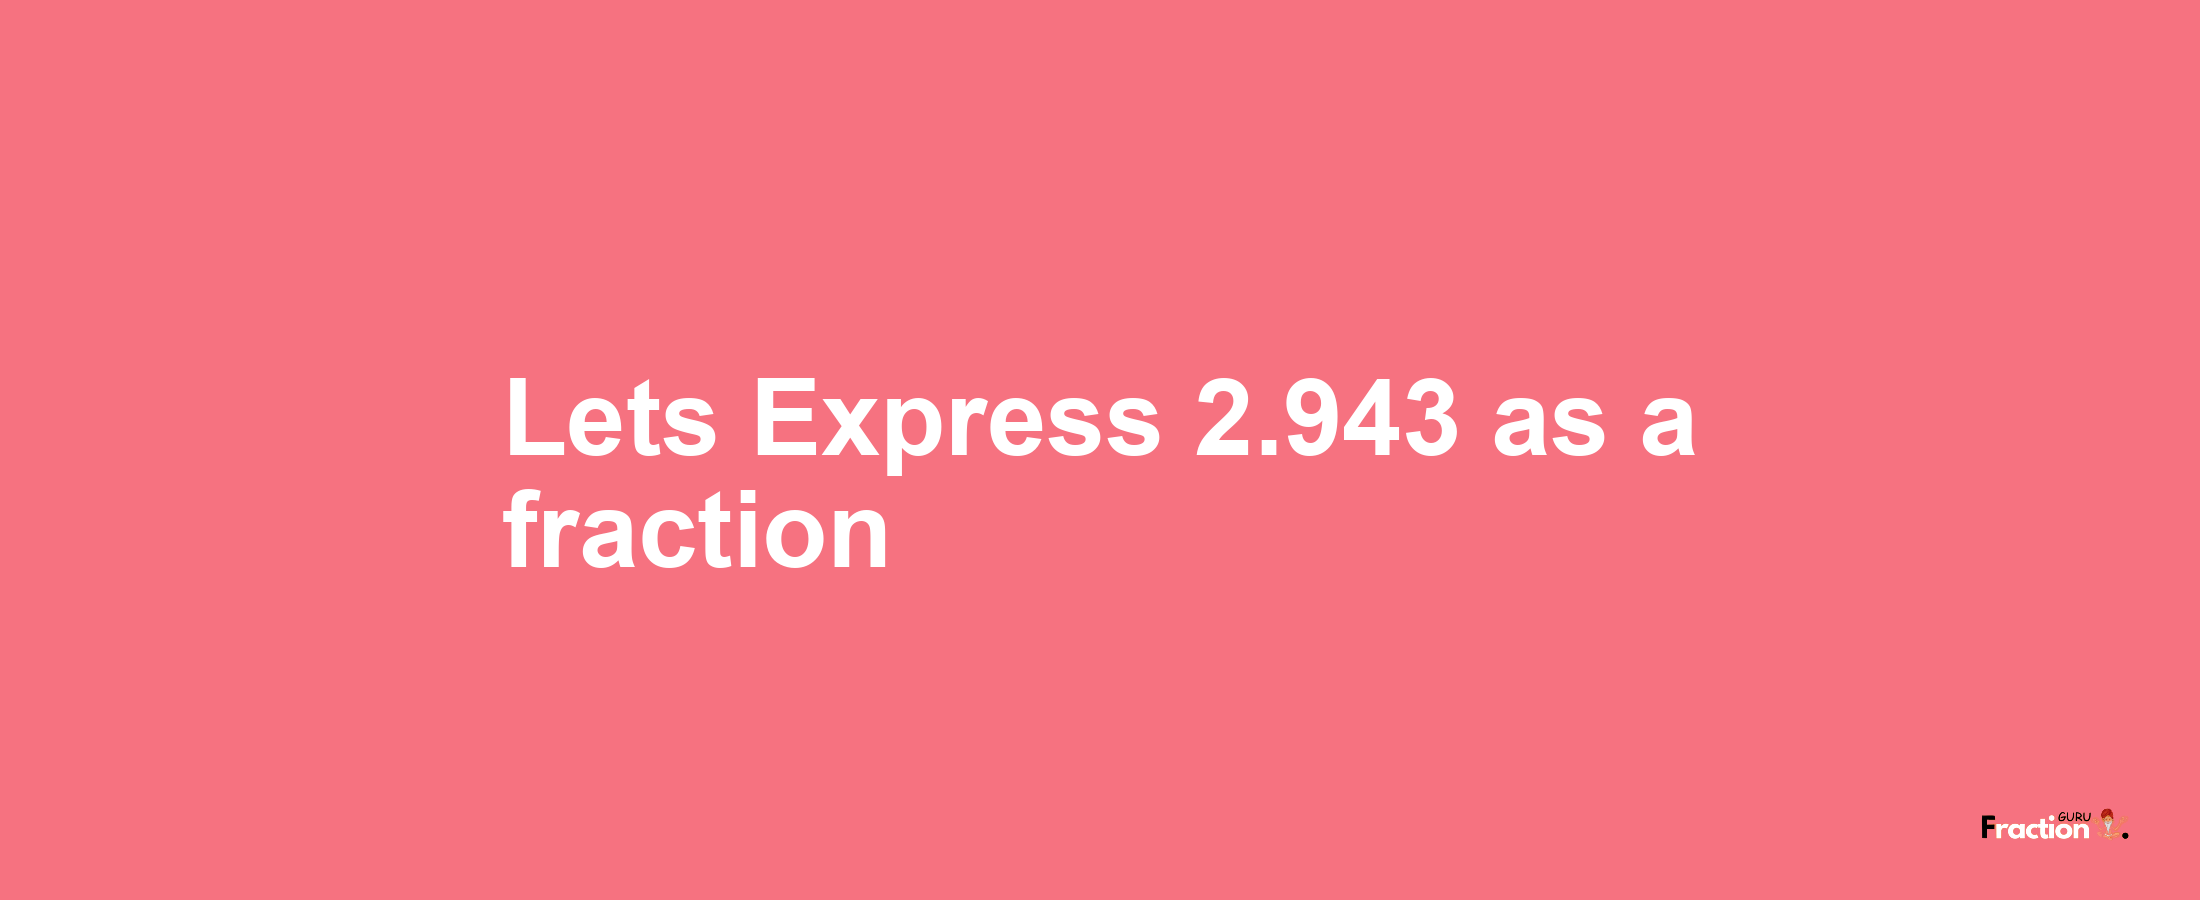 Lets Express 2.943 as afraction